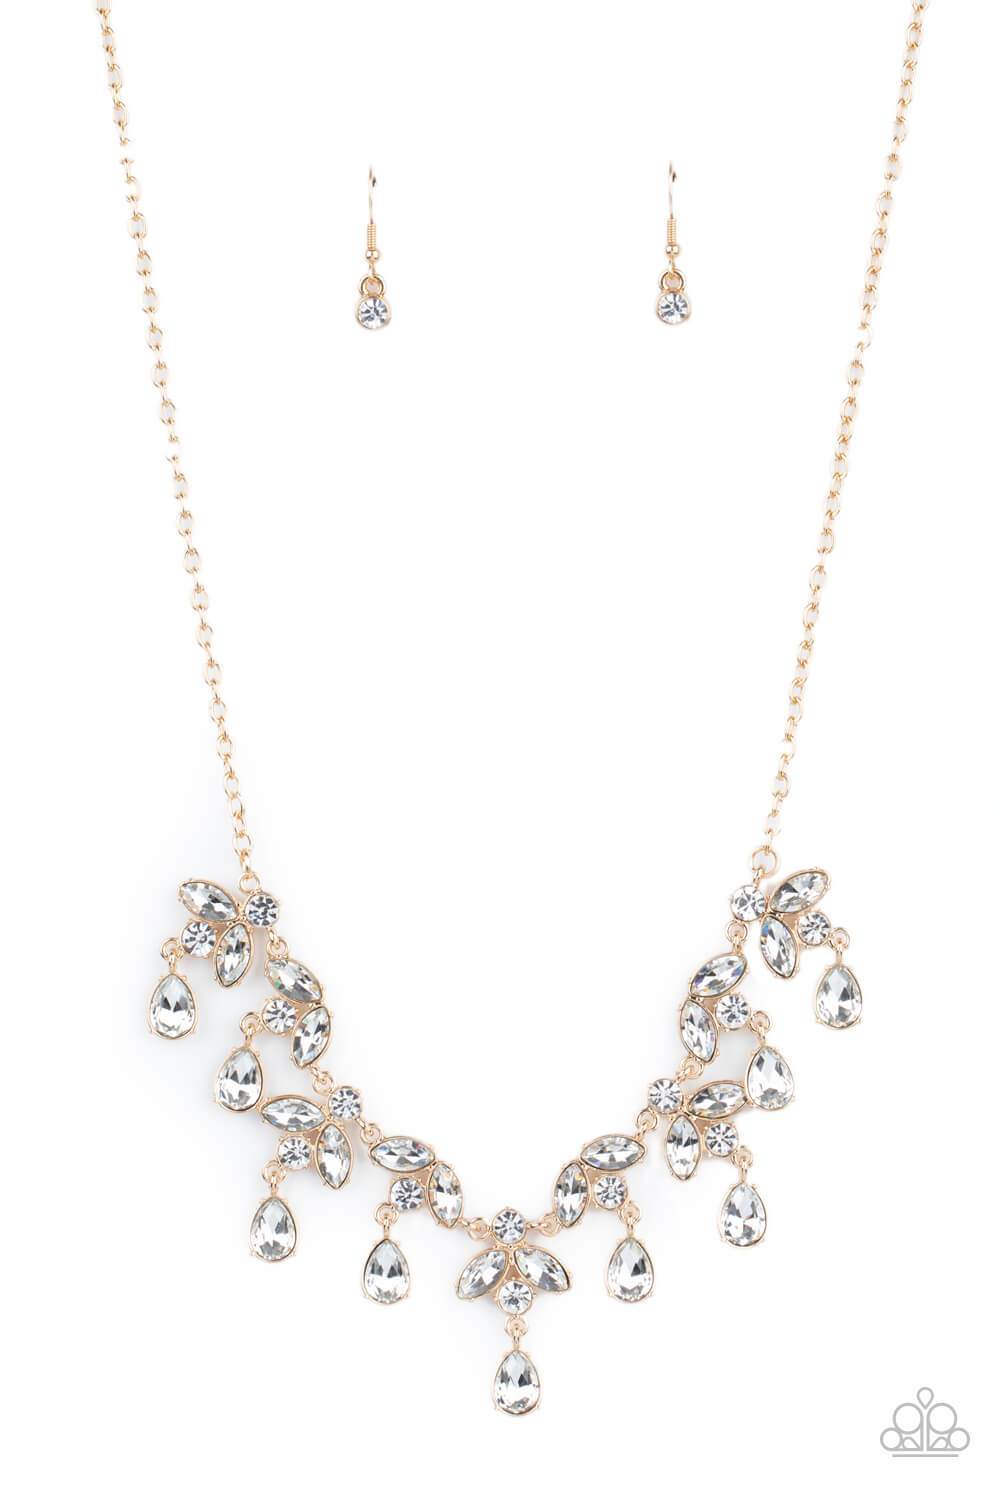 Vintage Royale - Gold Necklace Set March 2021 Life of the Party Exclusive - Princess Glam Shop